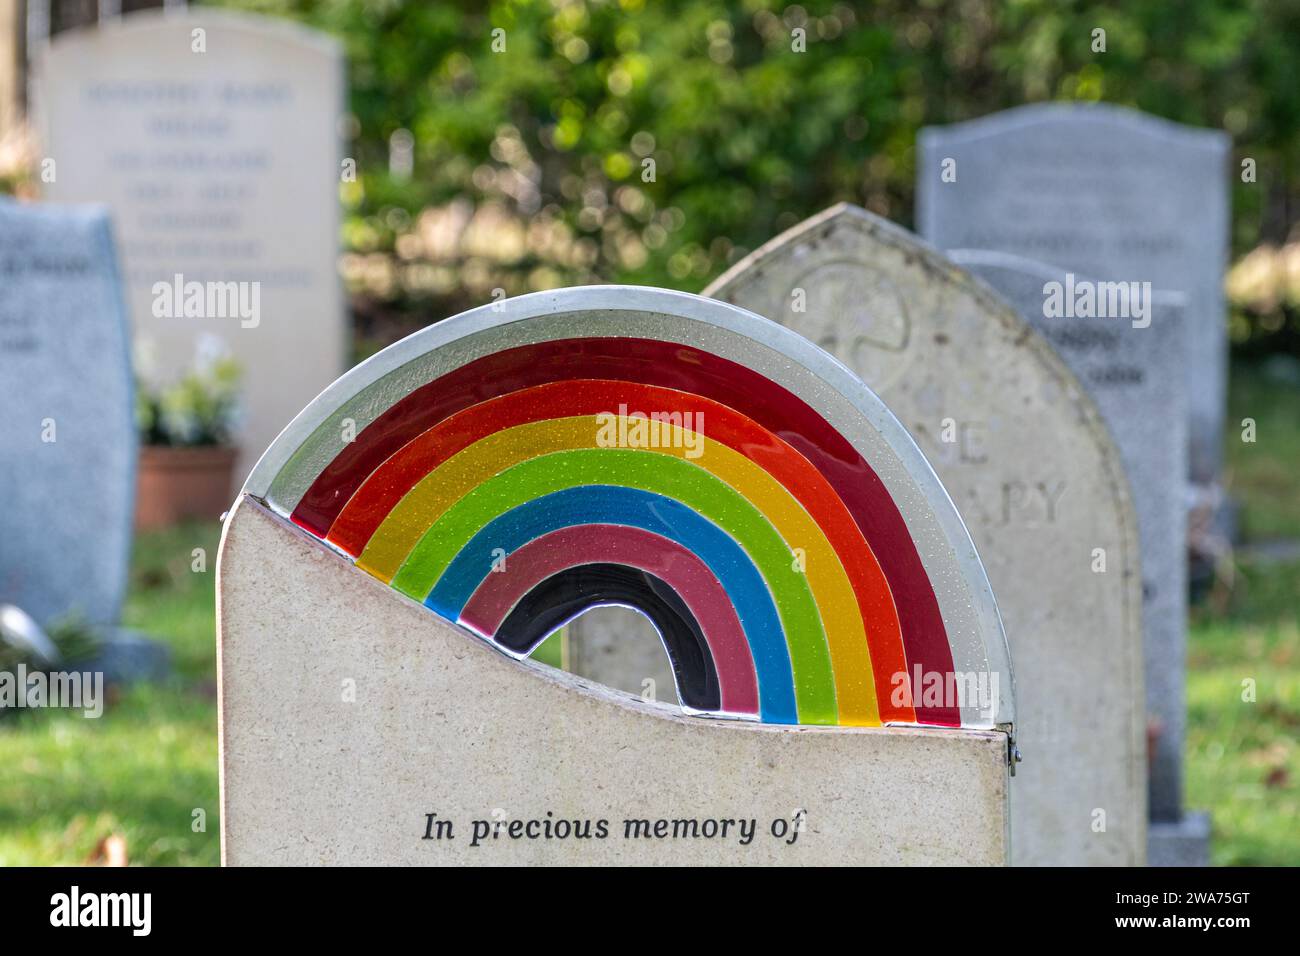 Headstone or gravestone with a LGBTQ pride rainbow on it in a UK cemetery Stock Photo